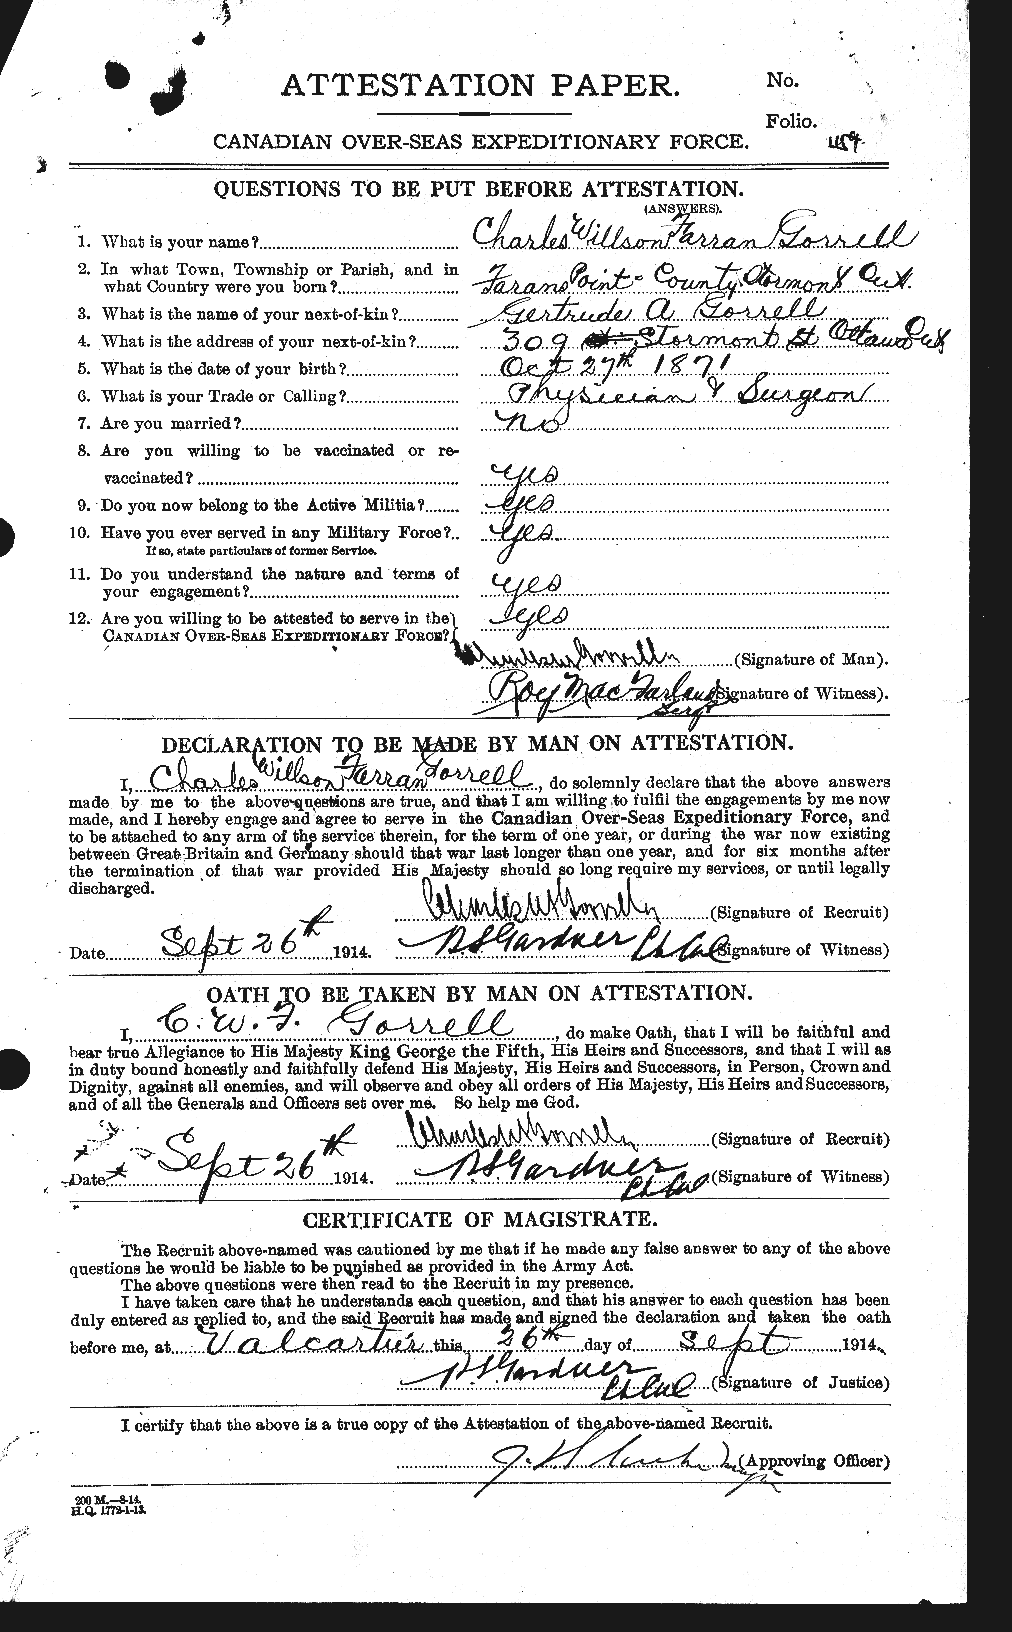 Personnel Records of the First World War - CEF 358186a